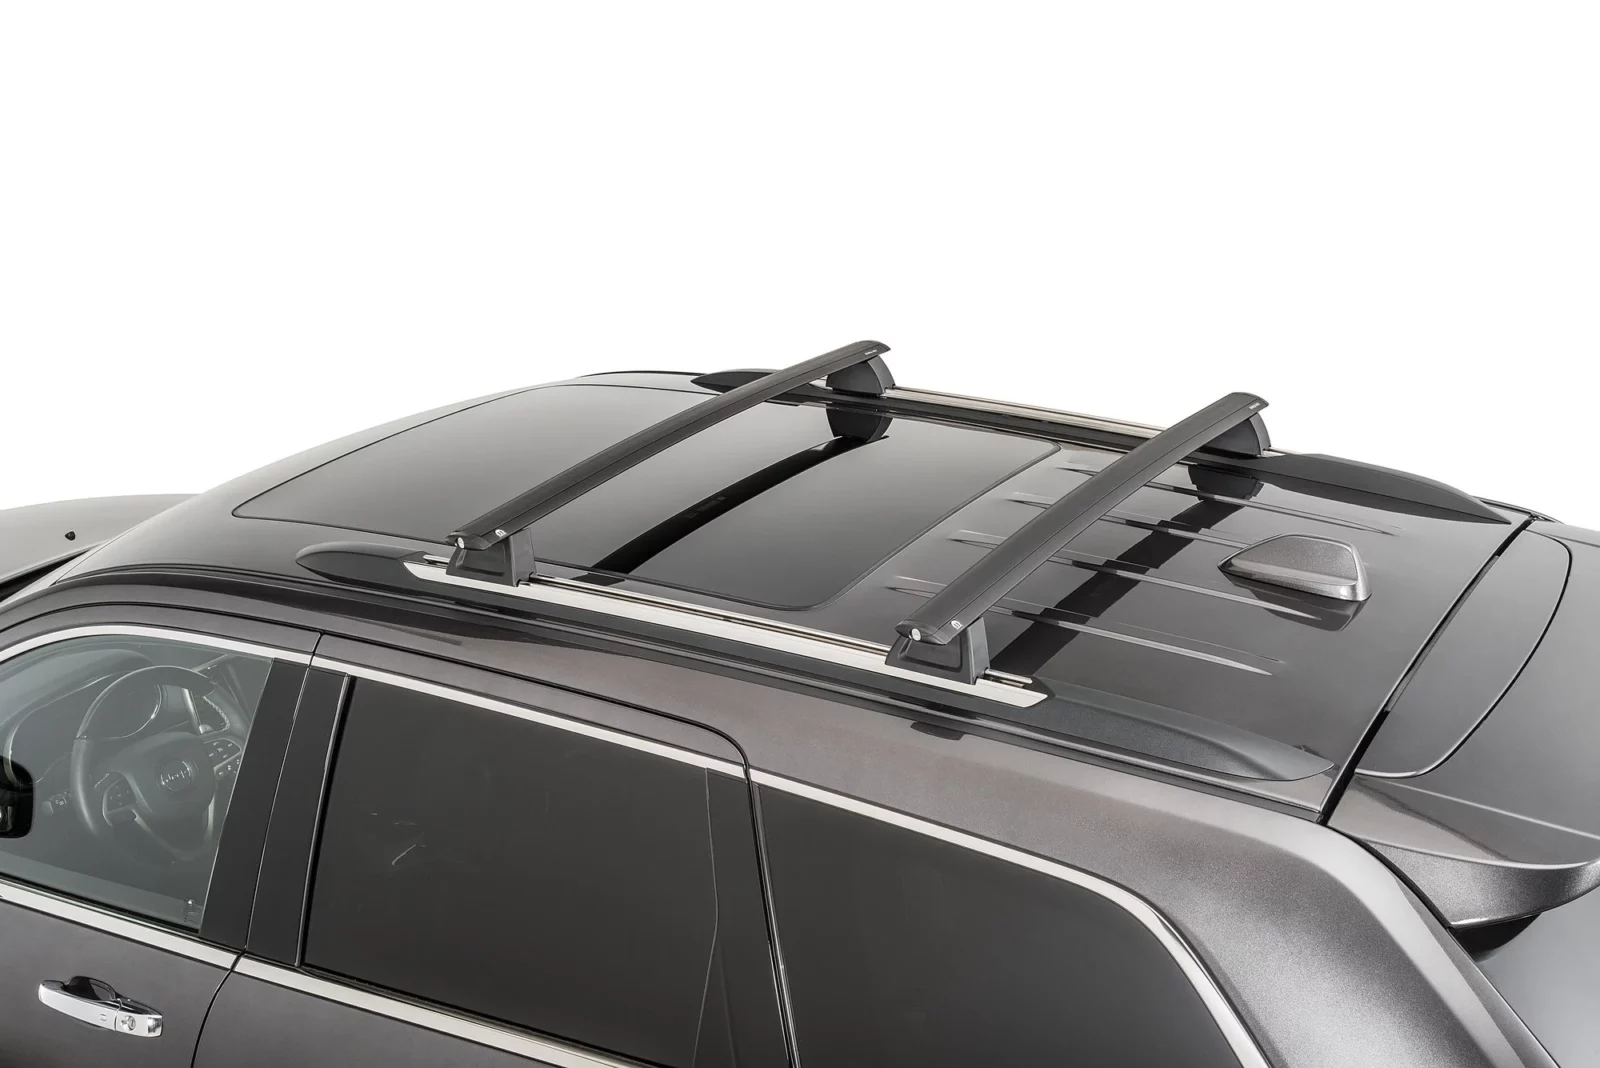 2014 Jeep Grand Cherokee Roof Rack Weight Limit